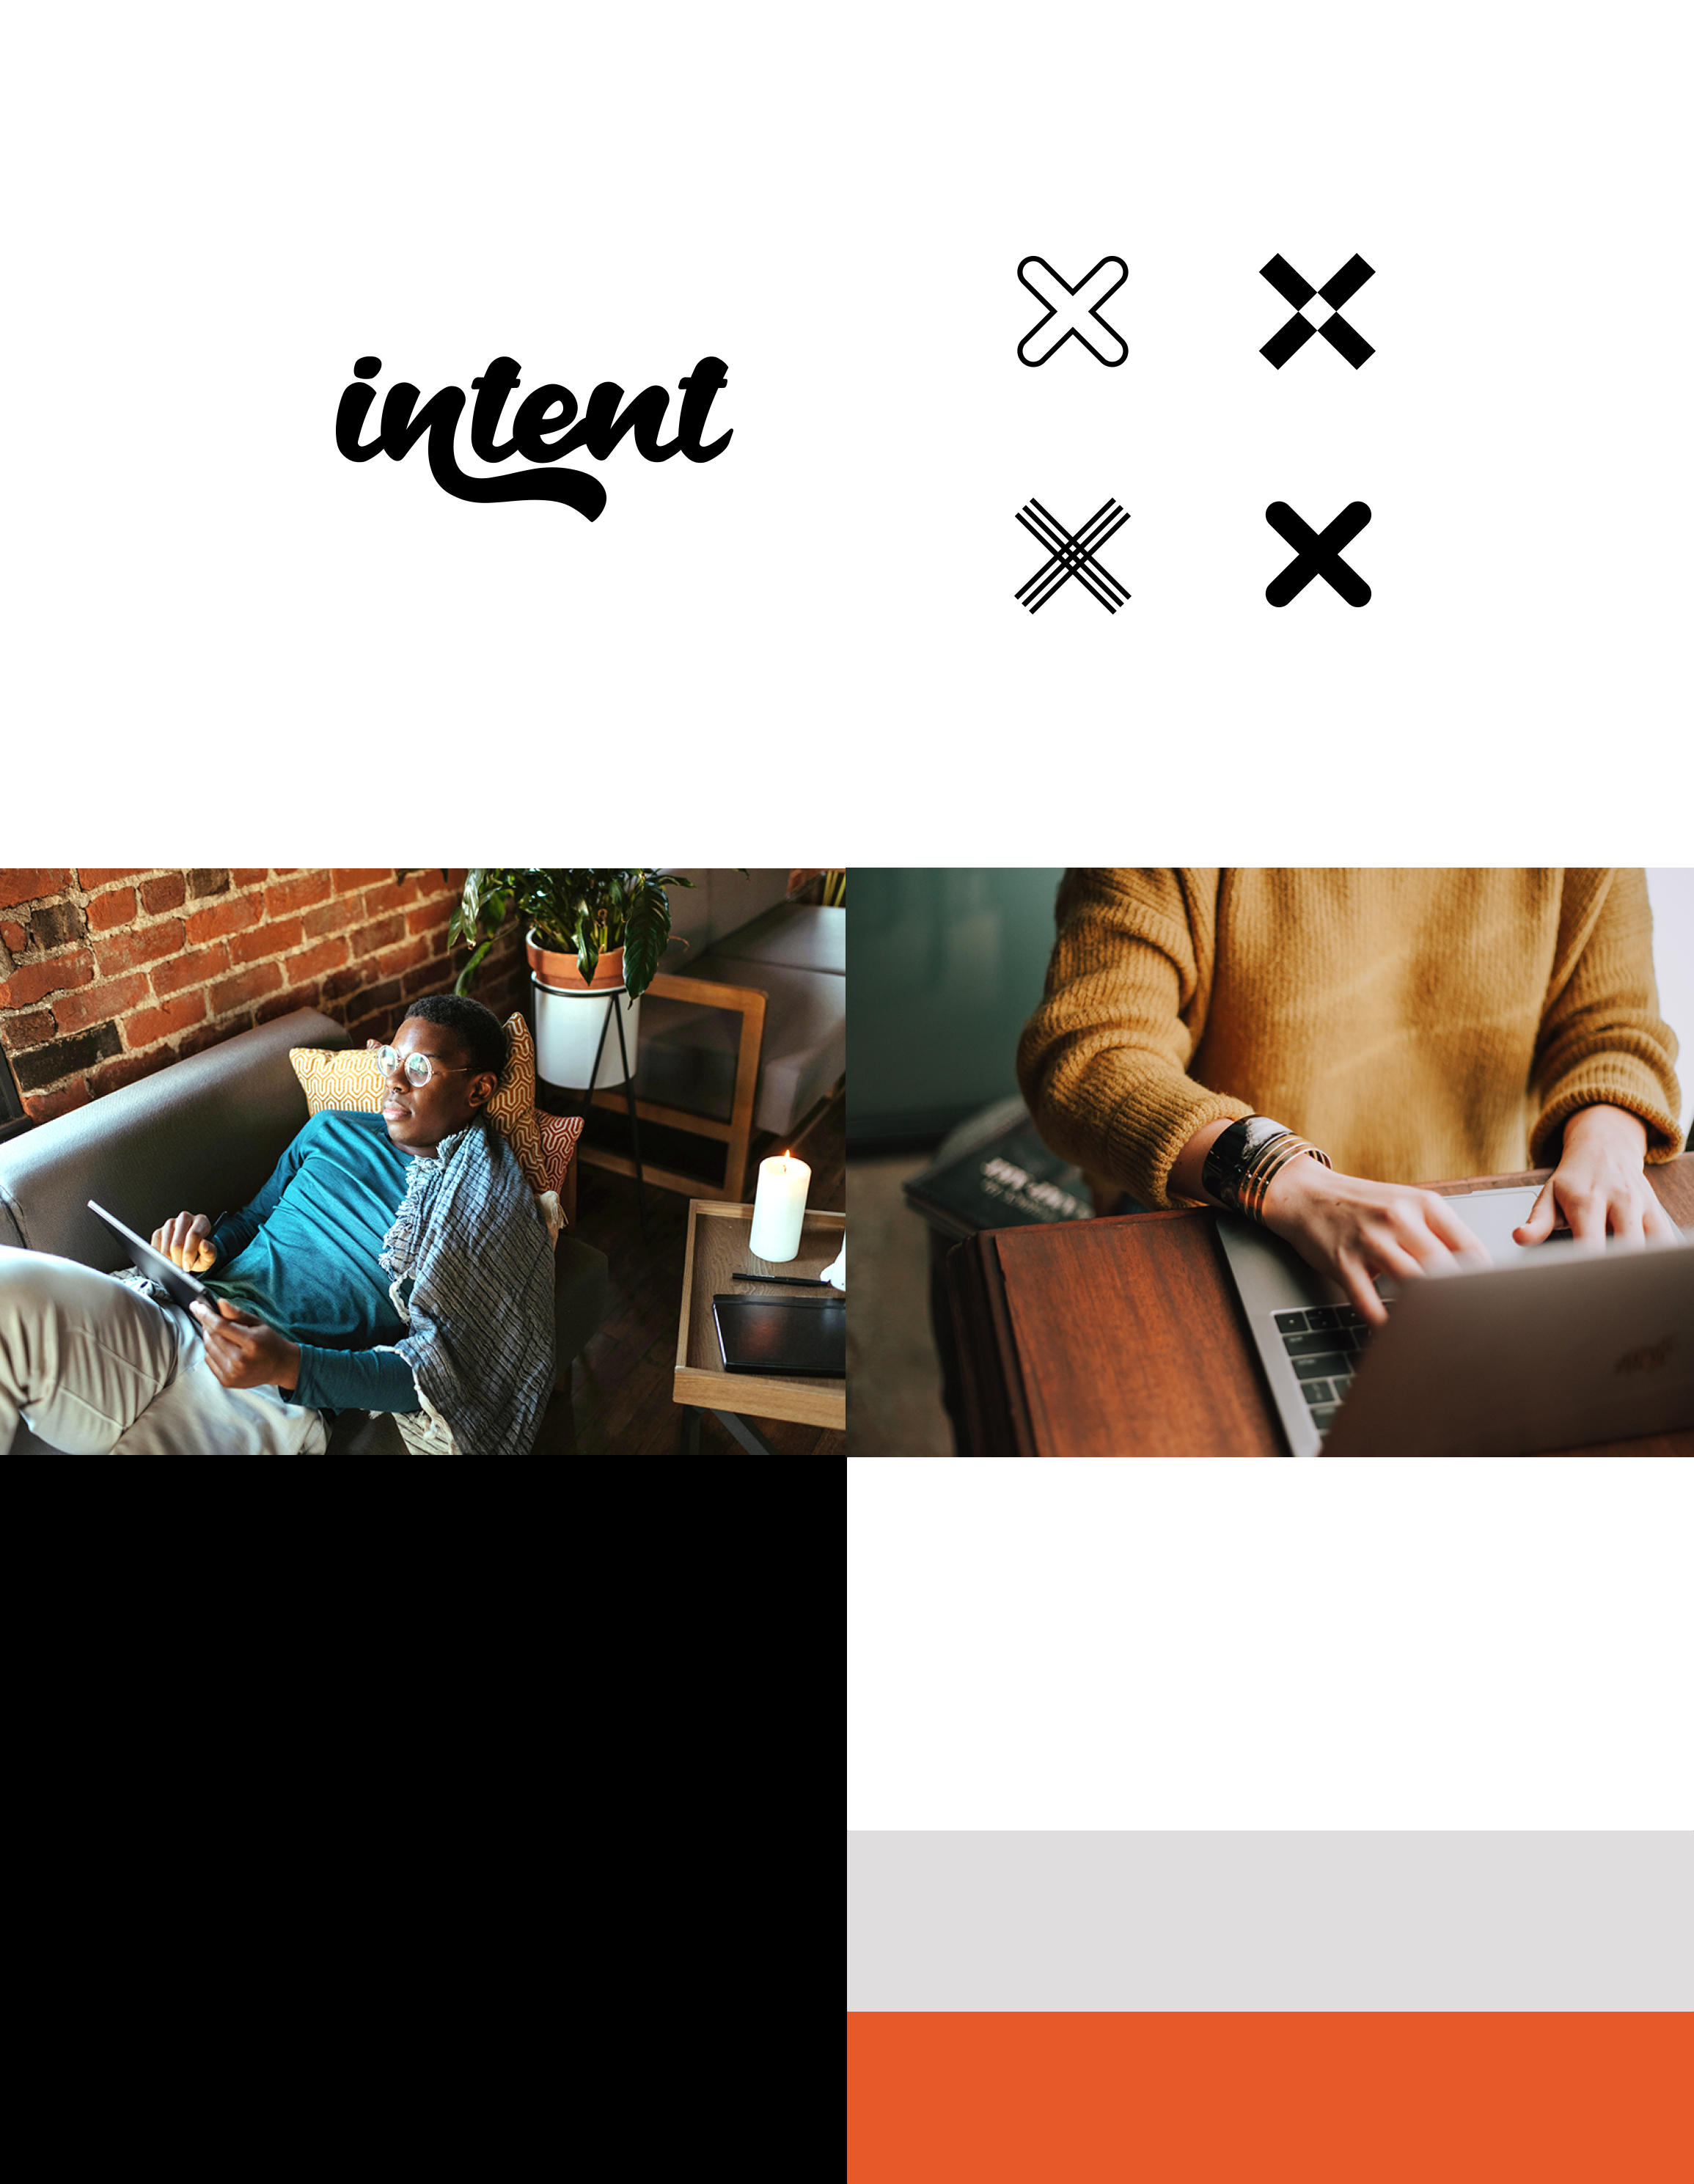 Intent brand guidelines